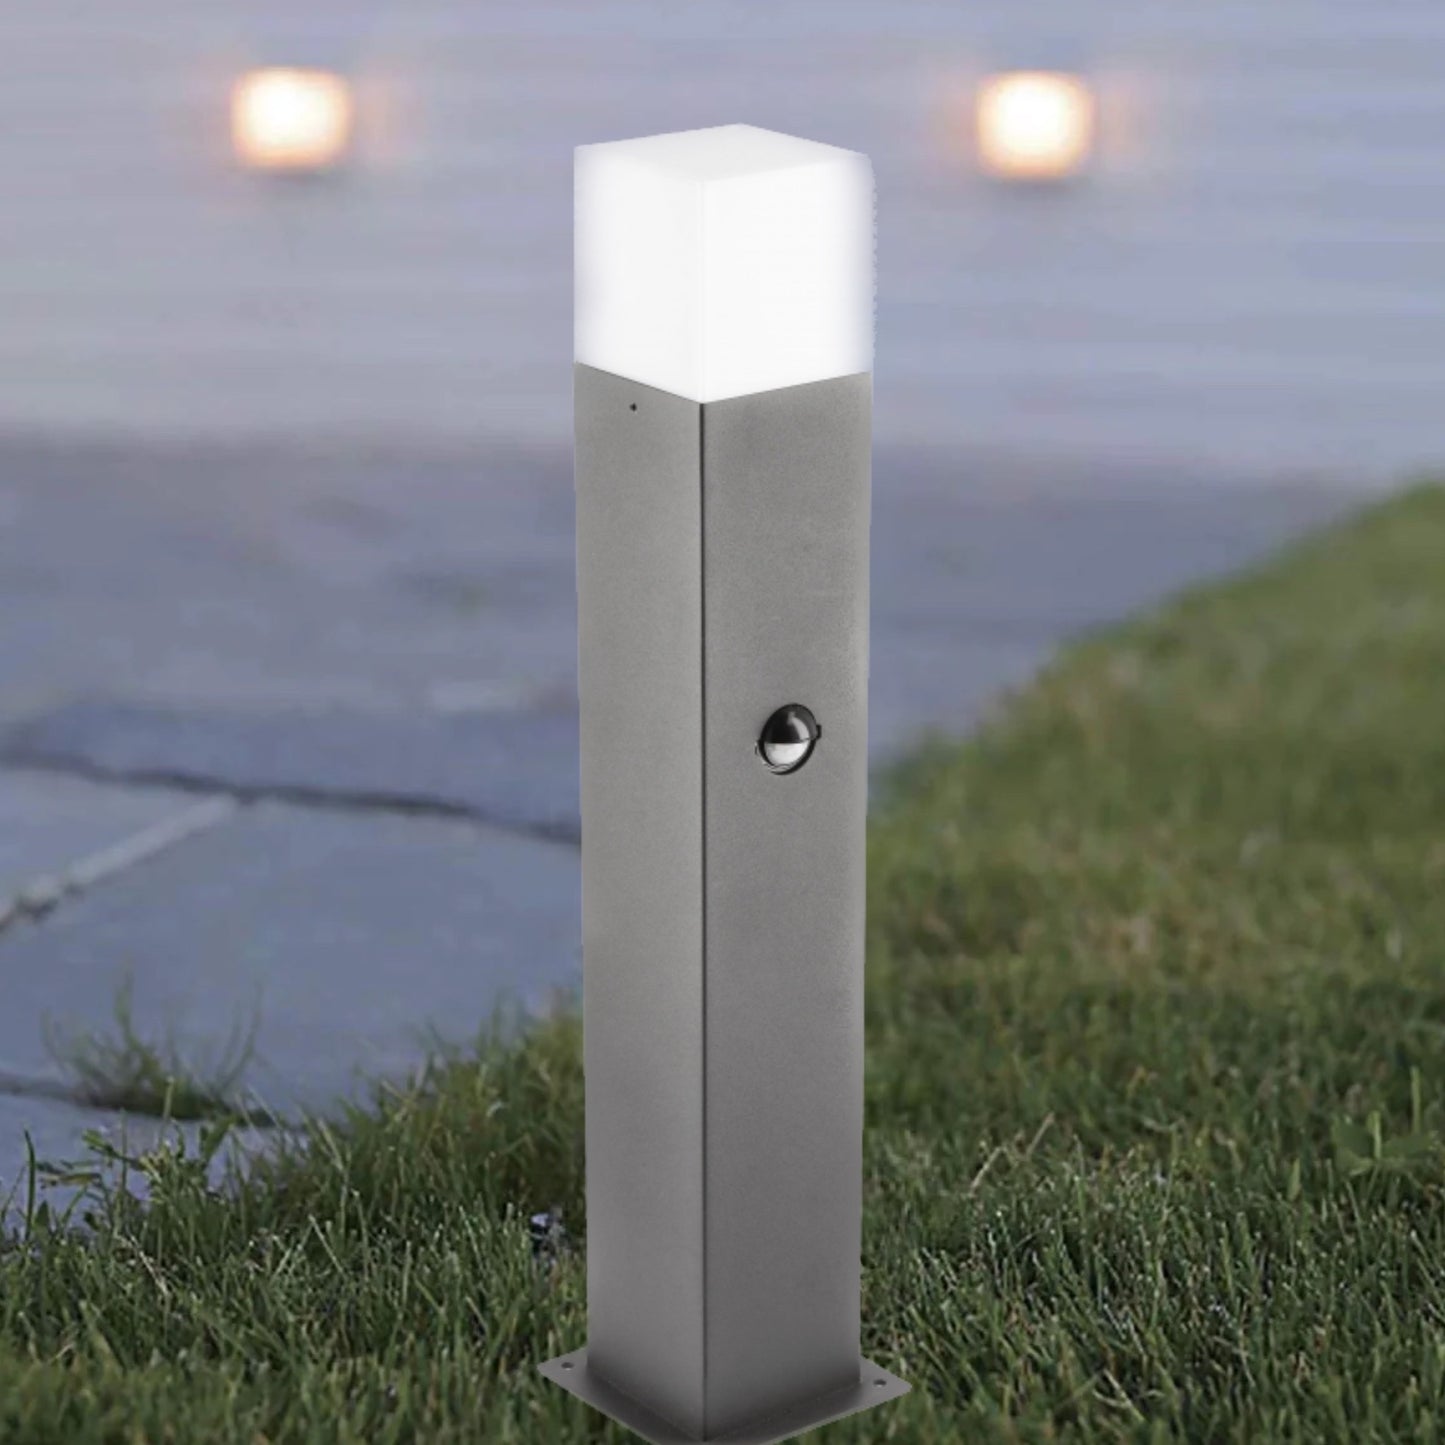 Our Amara dark grey outdoor square post light would look perfect in a modern or more traditional garden design. Outside post lights can provide atmospheric light in your garden, at the front door or on the terrace as well as a great security solution. It is designed for durability and longevity with its robust material producing a fully weatherproof and water resistant light fitting. Use an LED bulb to make this fitting energy efficient. This post light comes with a built in PIR sensor.